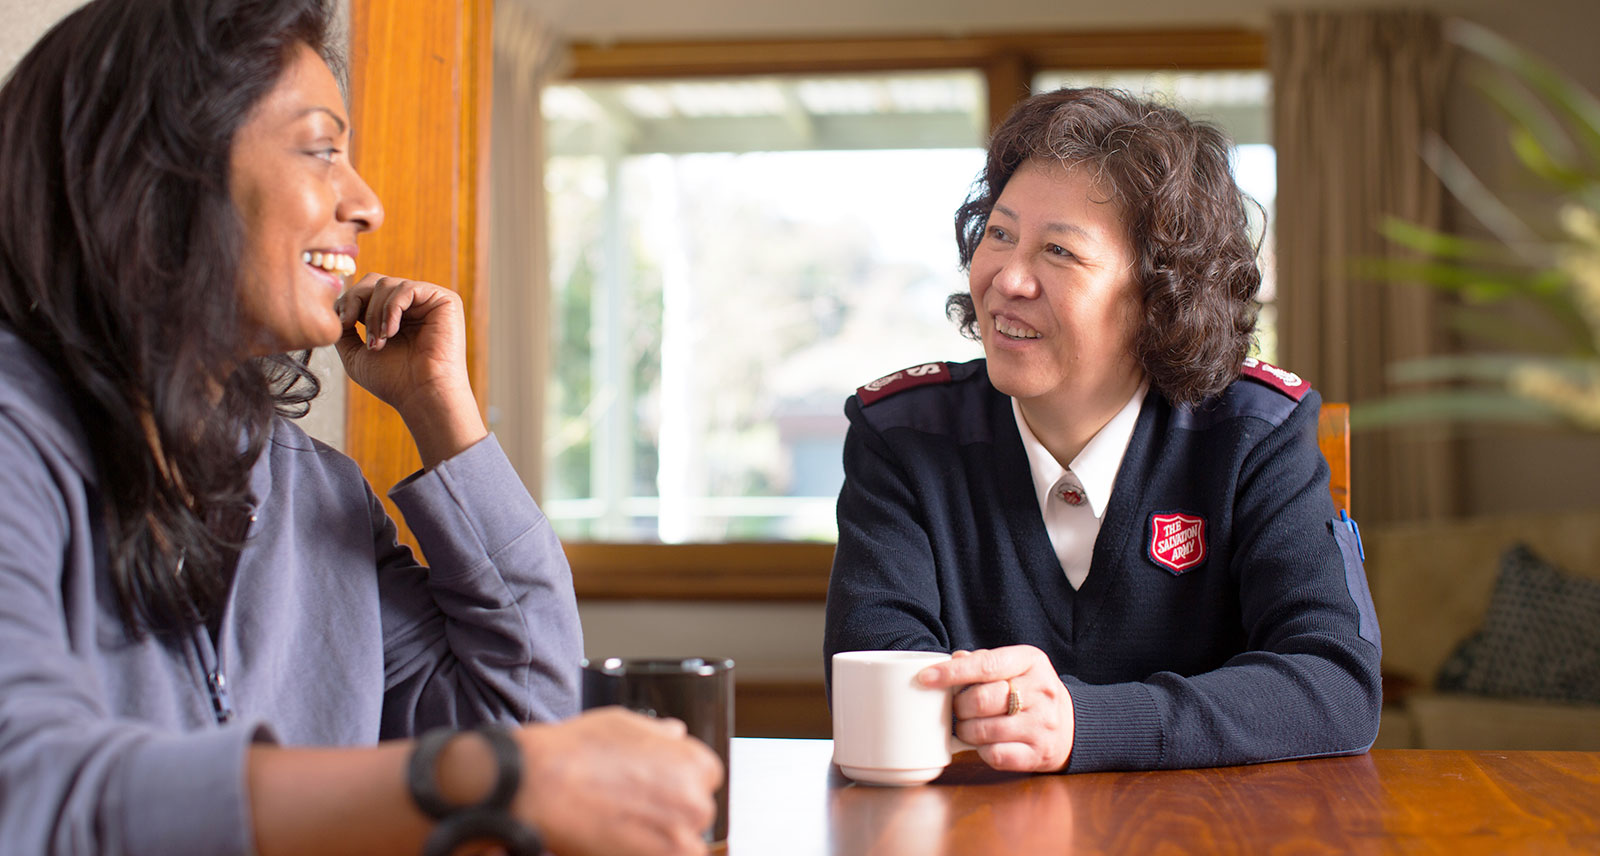 Salvation Army Officer listening to a client